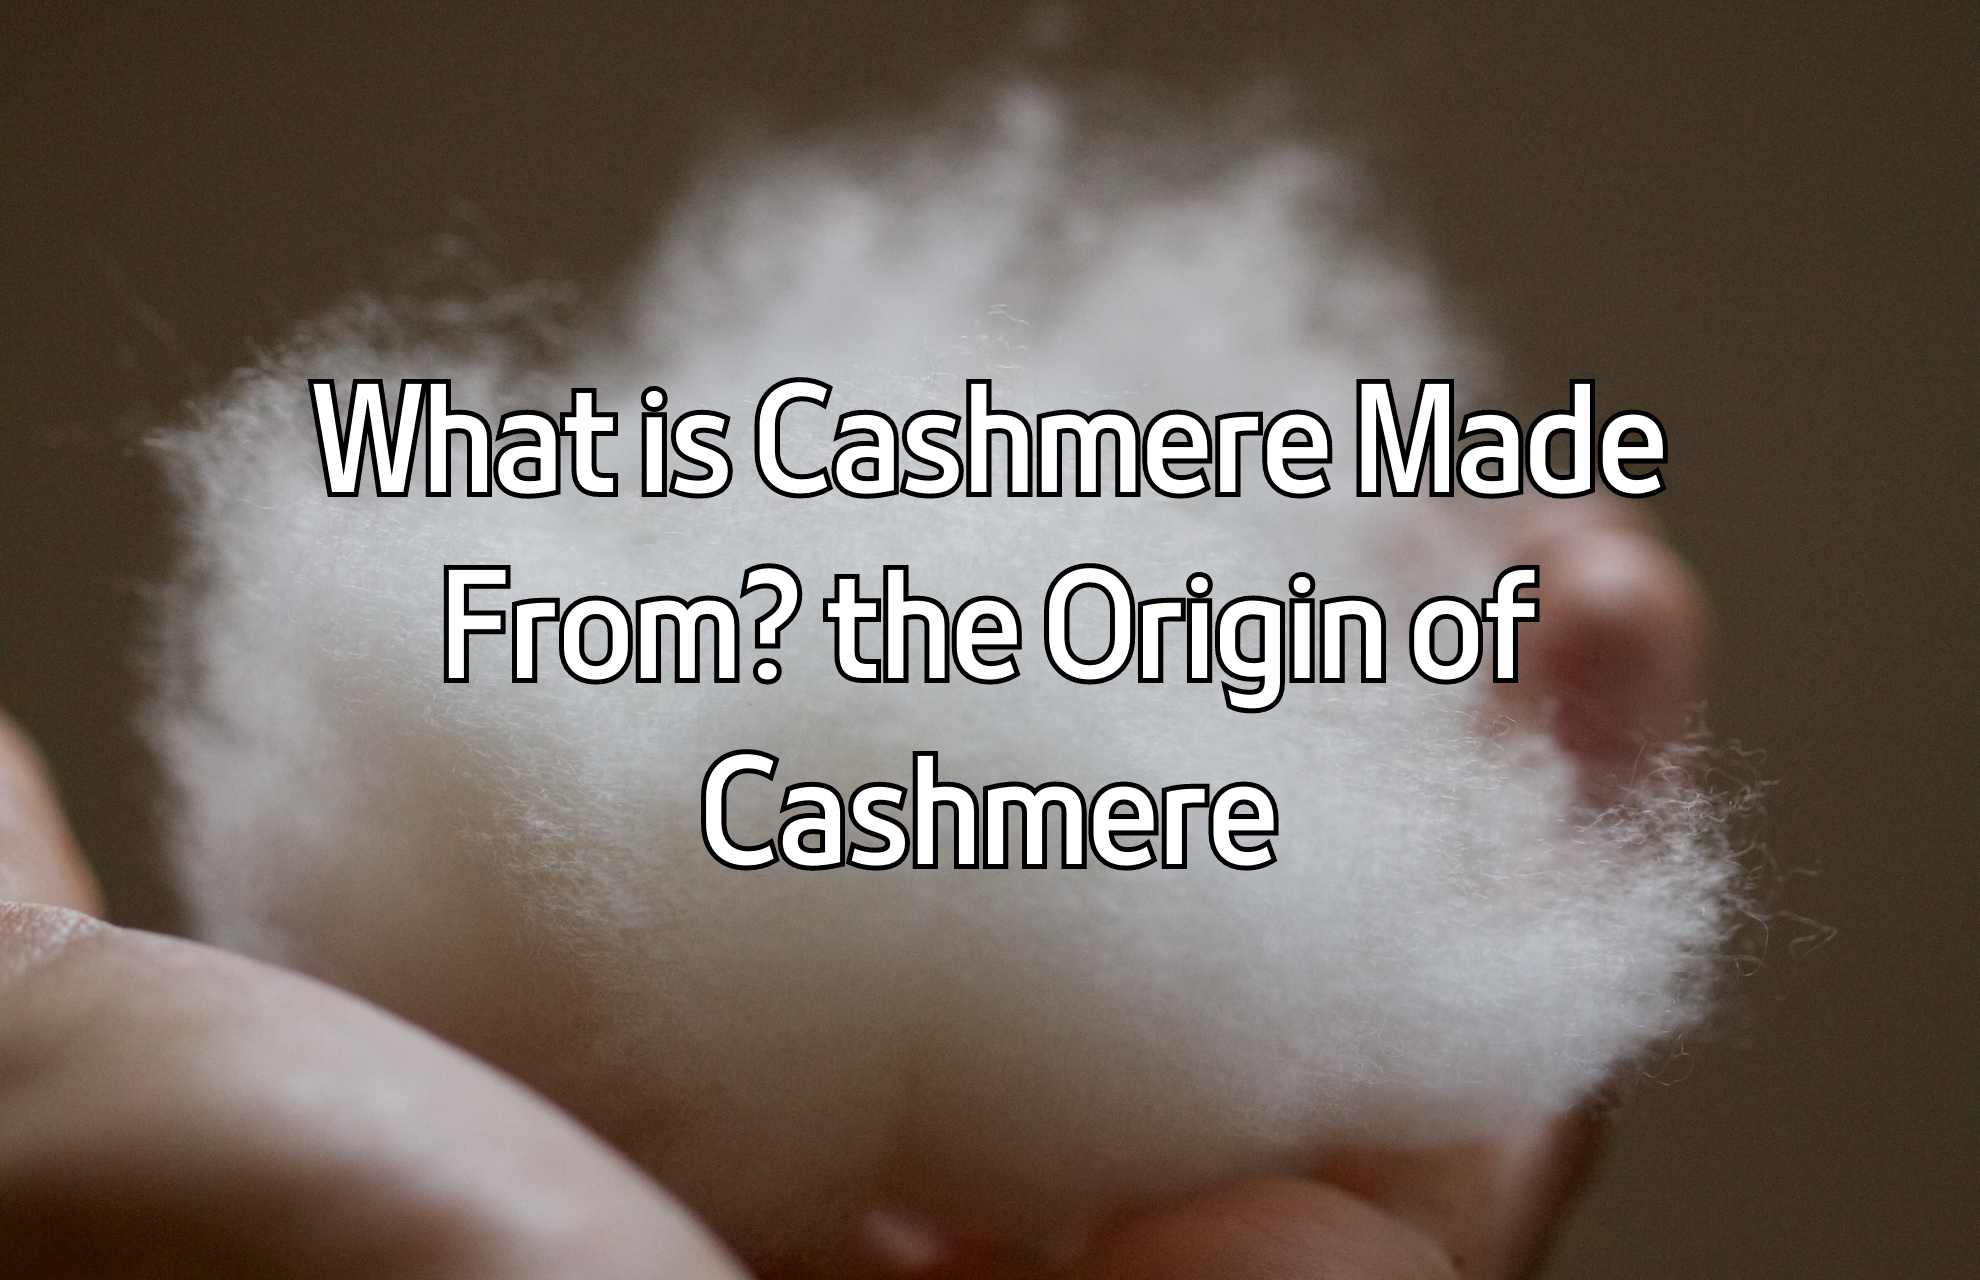 What is Cashmere Made From? the Origin of Cashmere